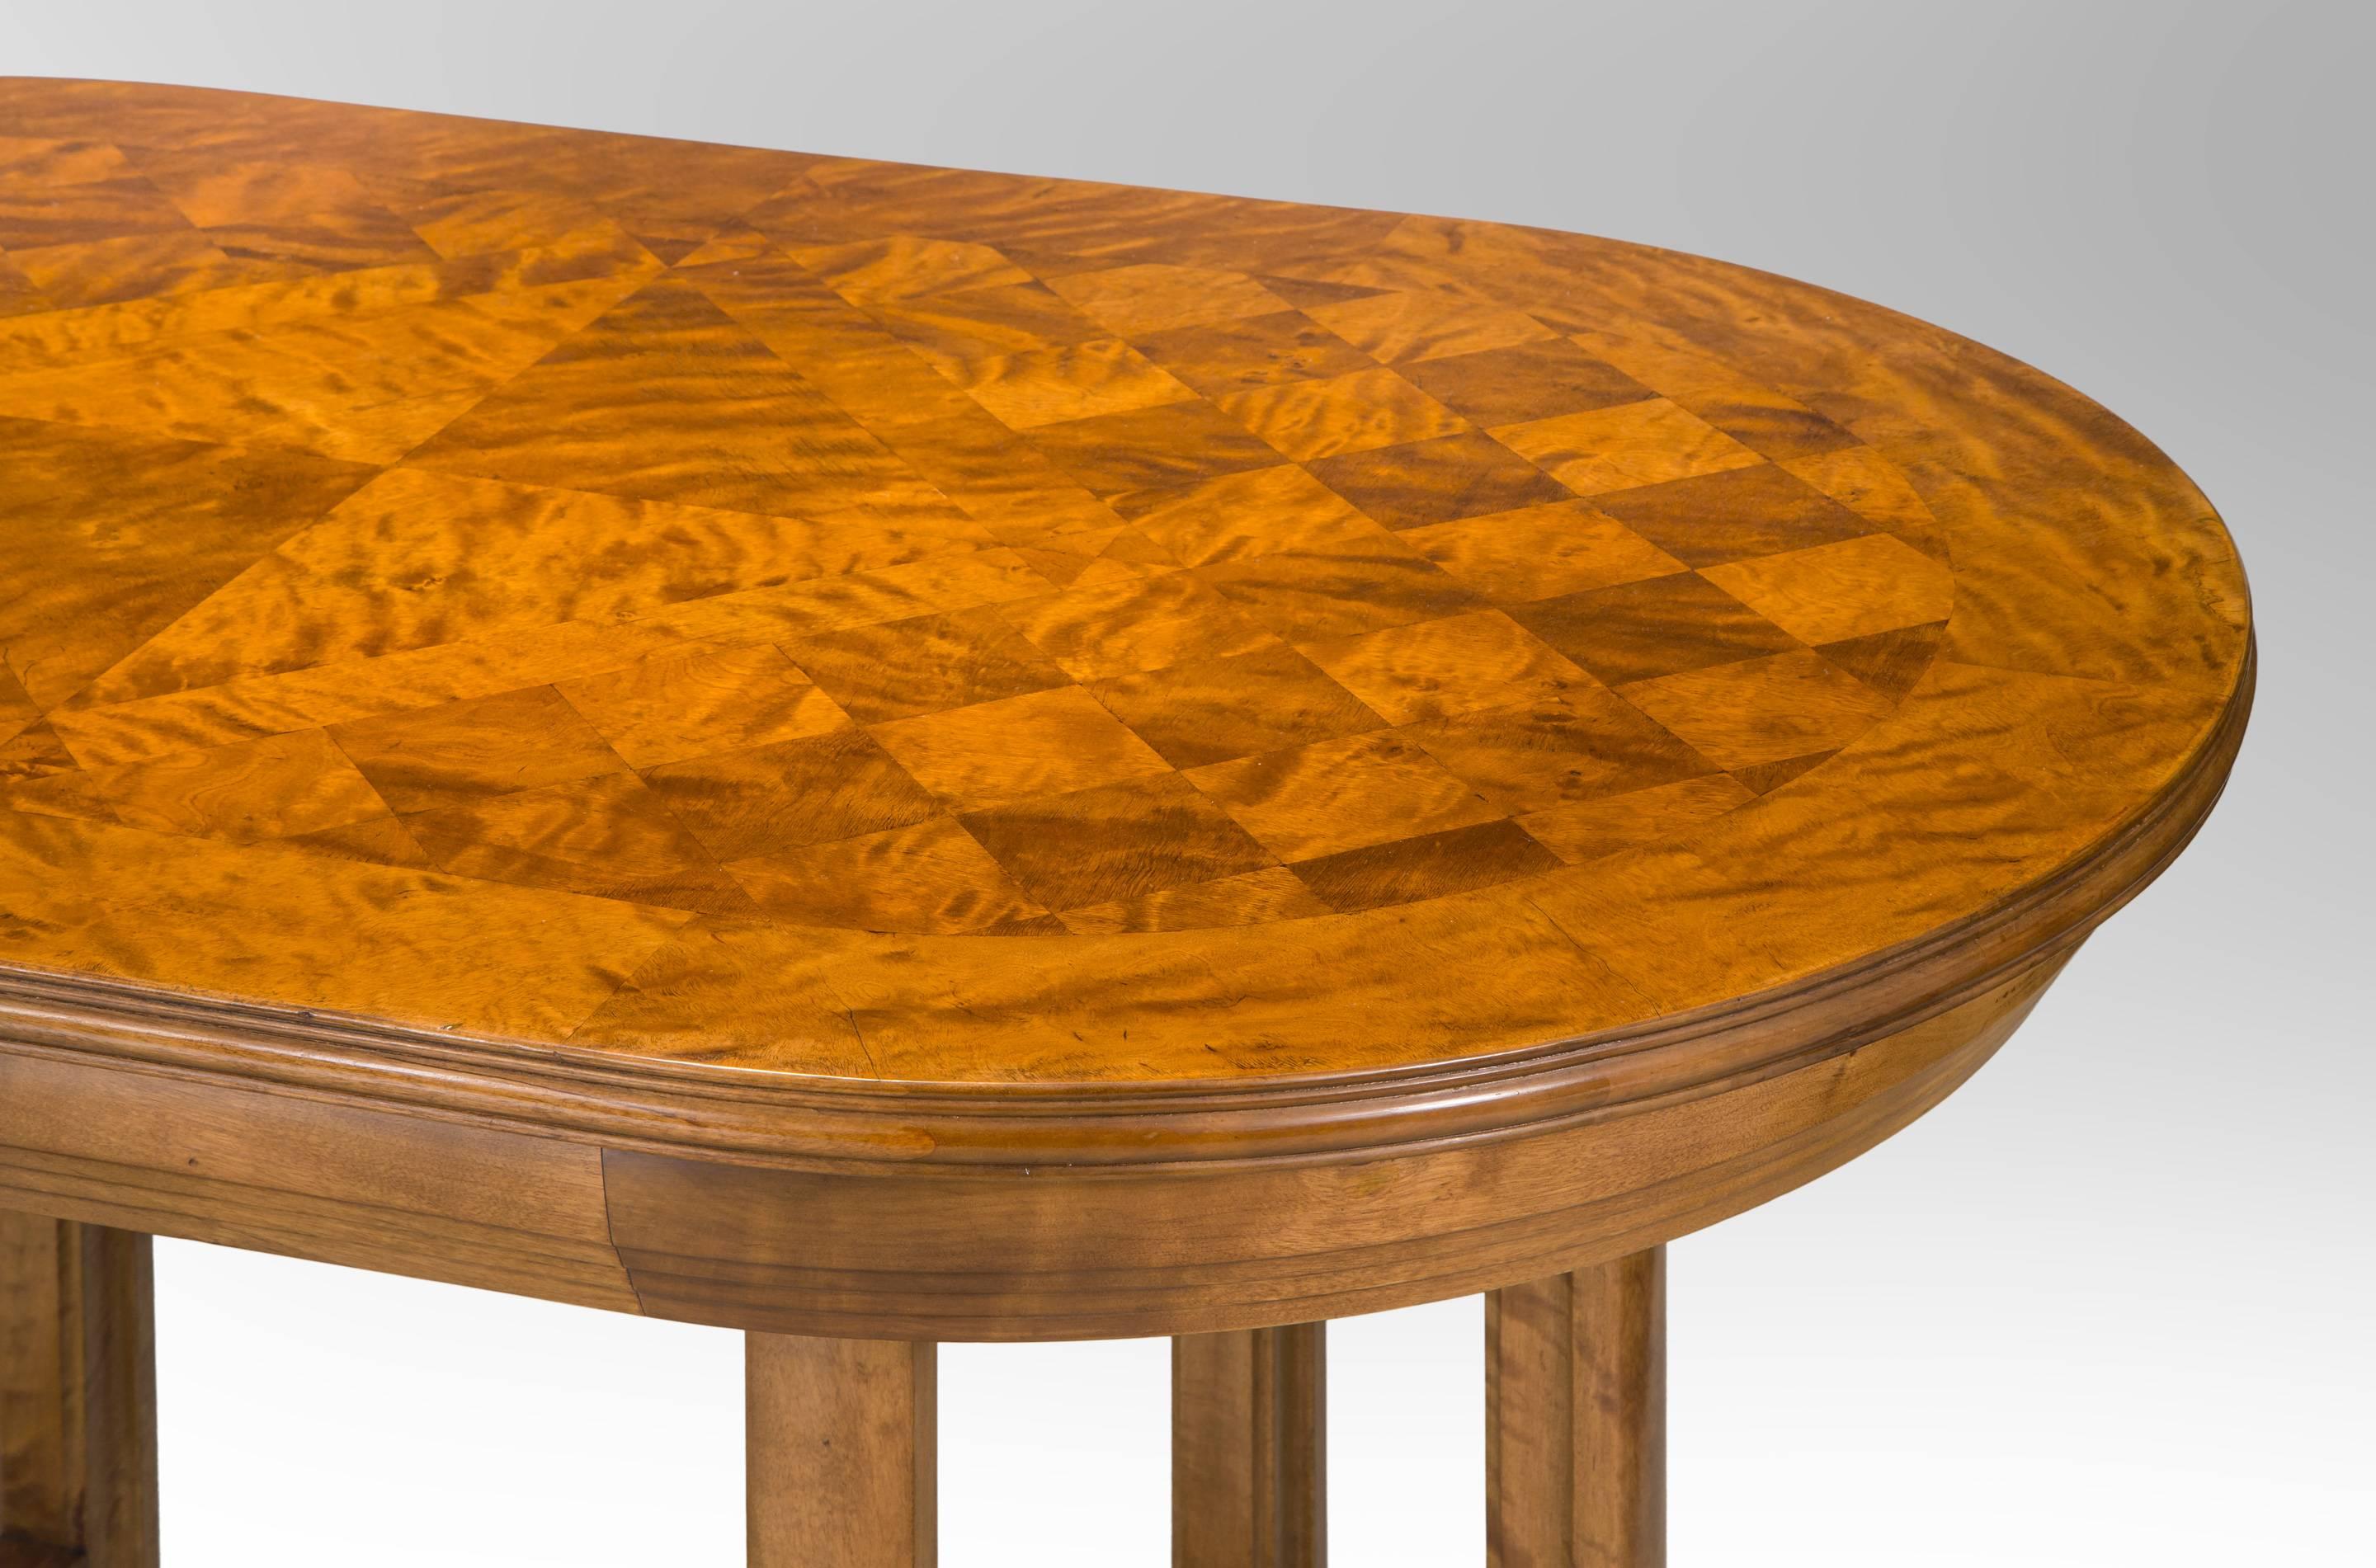 An exceptional table with an especially beautiful parquetry top from a period where a very limited number of pieces were created; its remarkable design maybe unique. The oval top composed of diagonal squares with a large diamond-shaped center, the